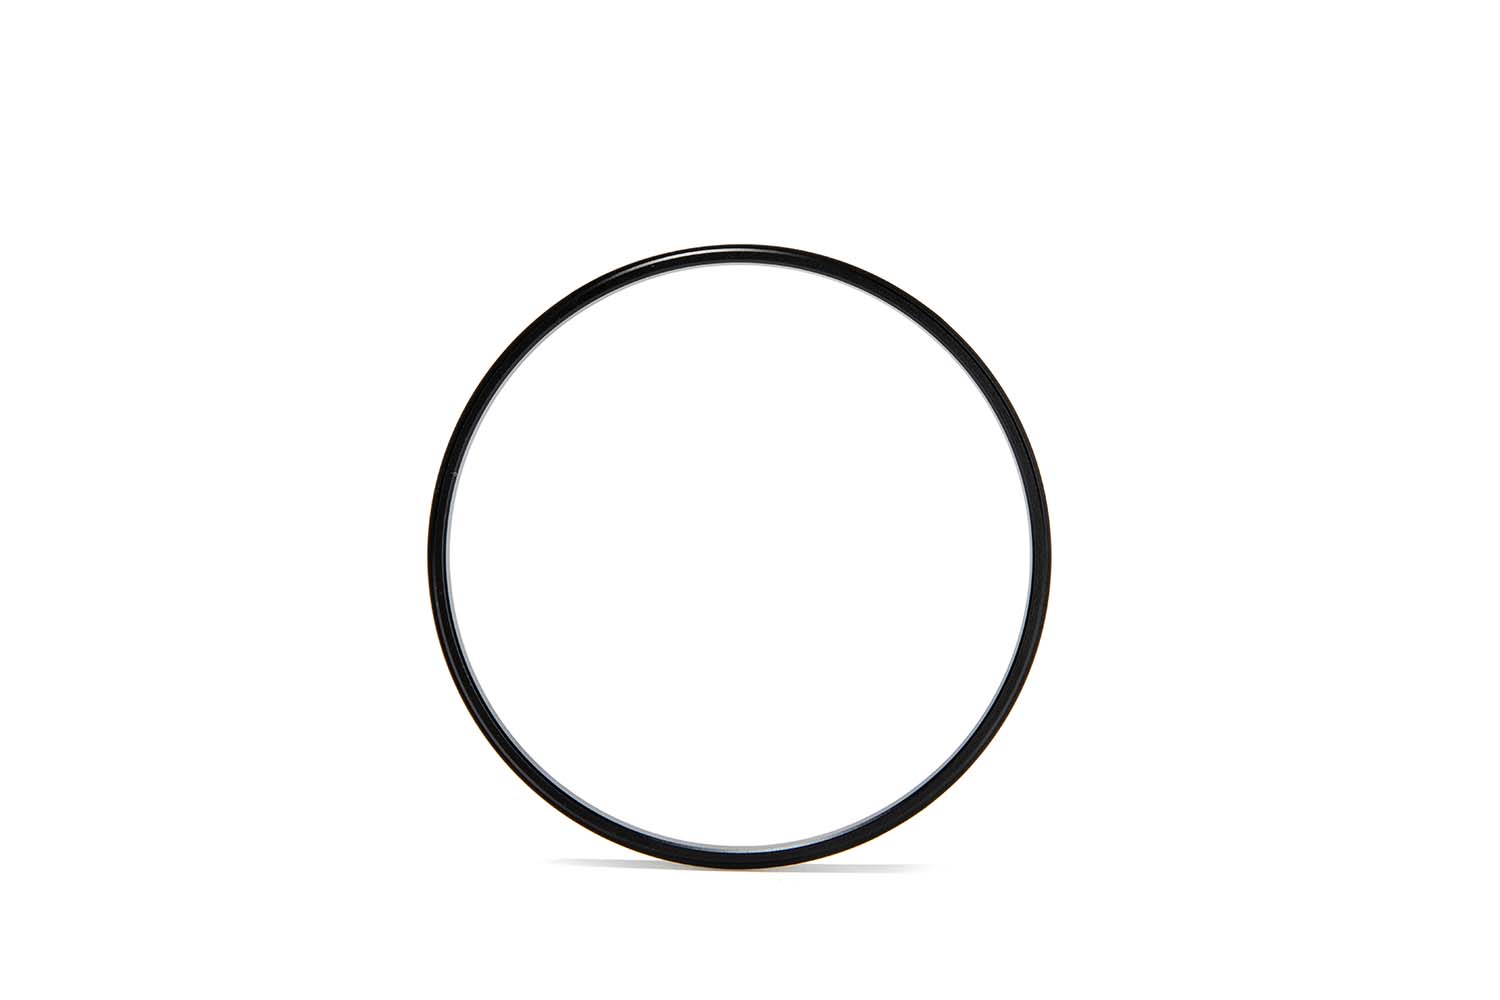 K100 K9 Basis Adapter Ring for 90mm Magnetic CPL